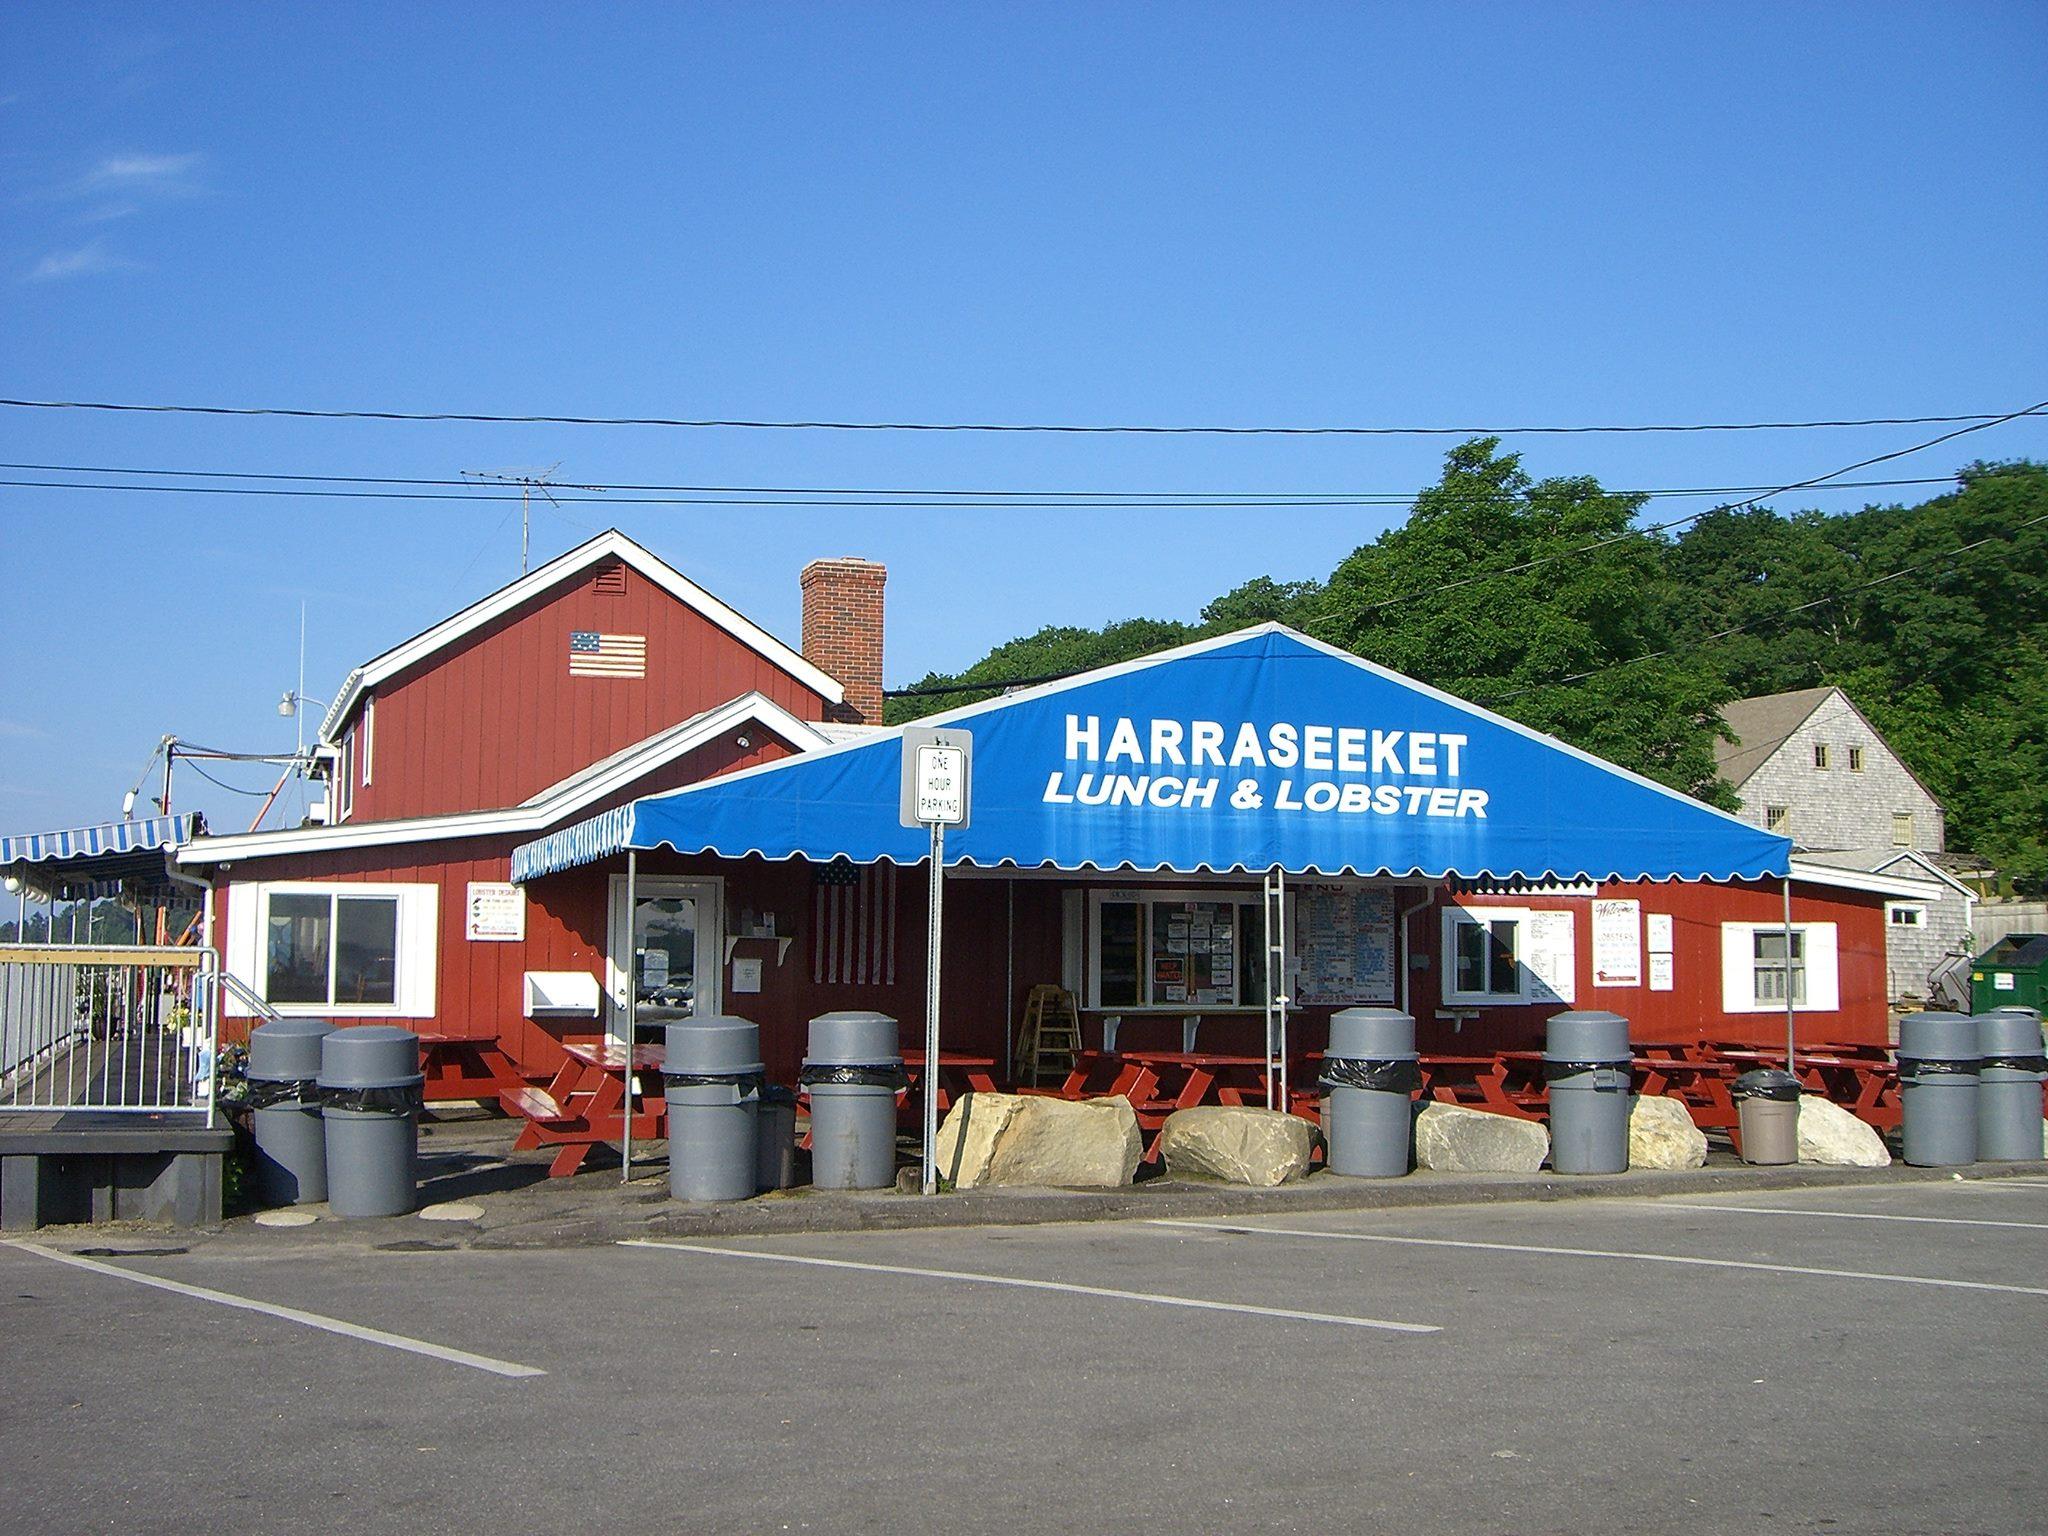 Pet Friendly Harraseeket Lunch and Lobster Company